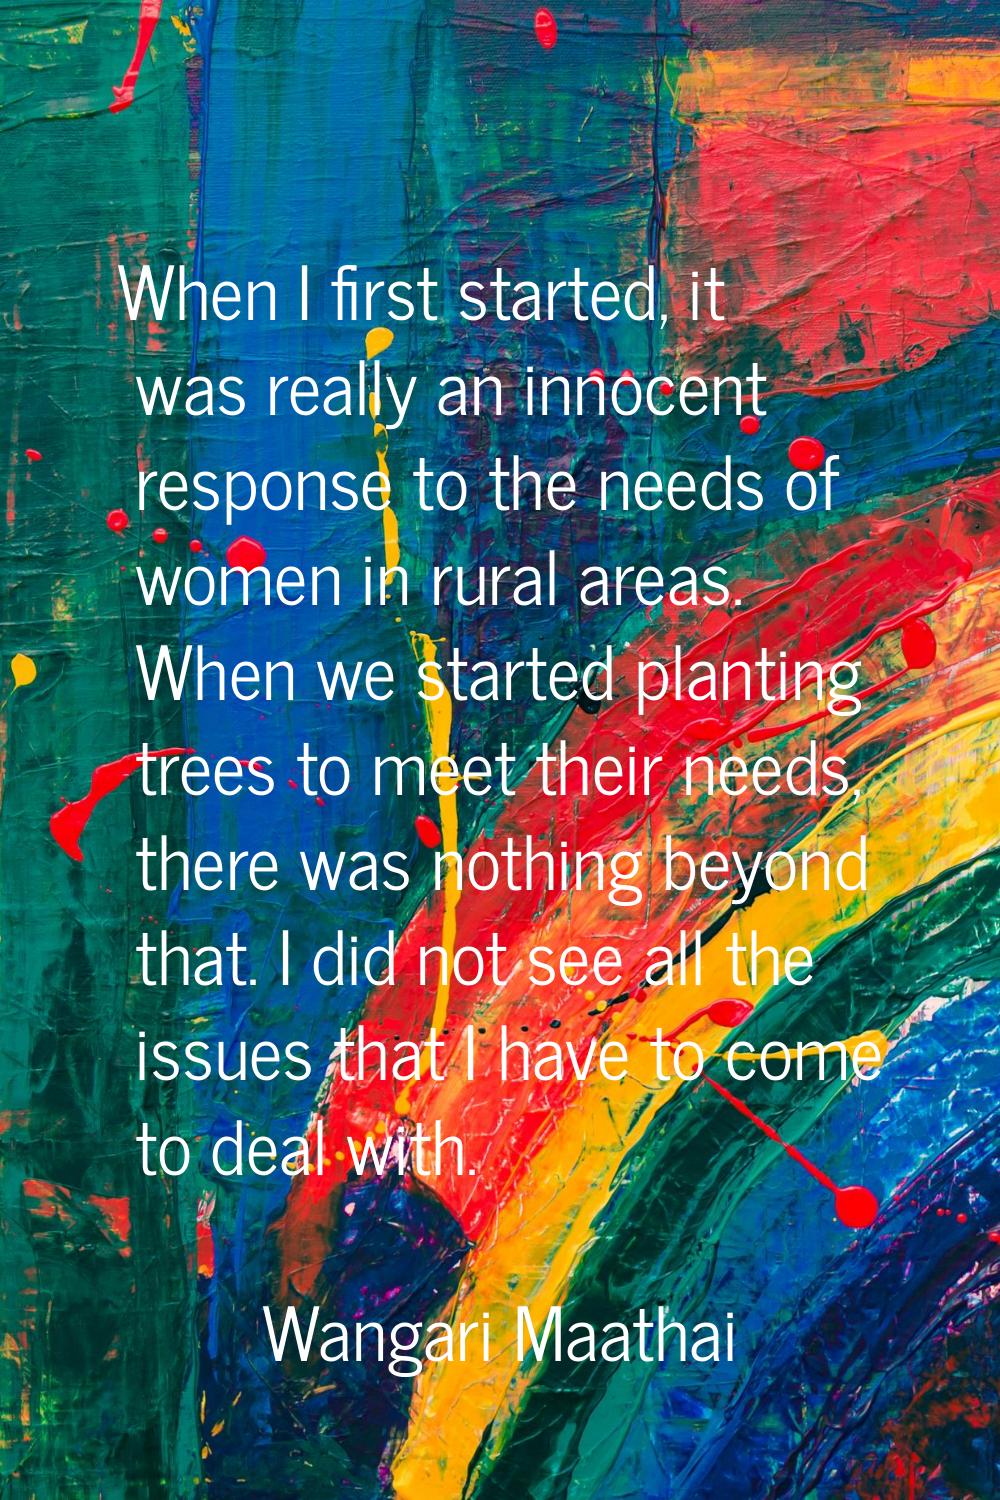 When I first started, it was really an innocent response to the needs of women in rural areas. When